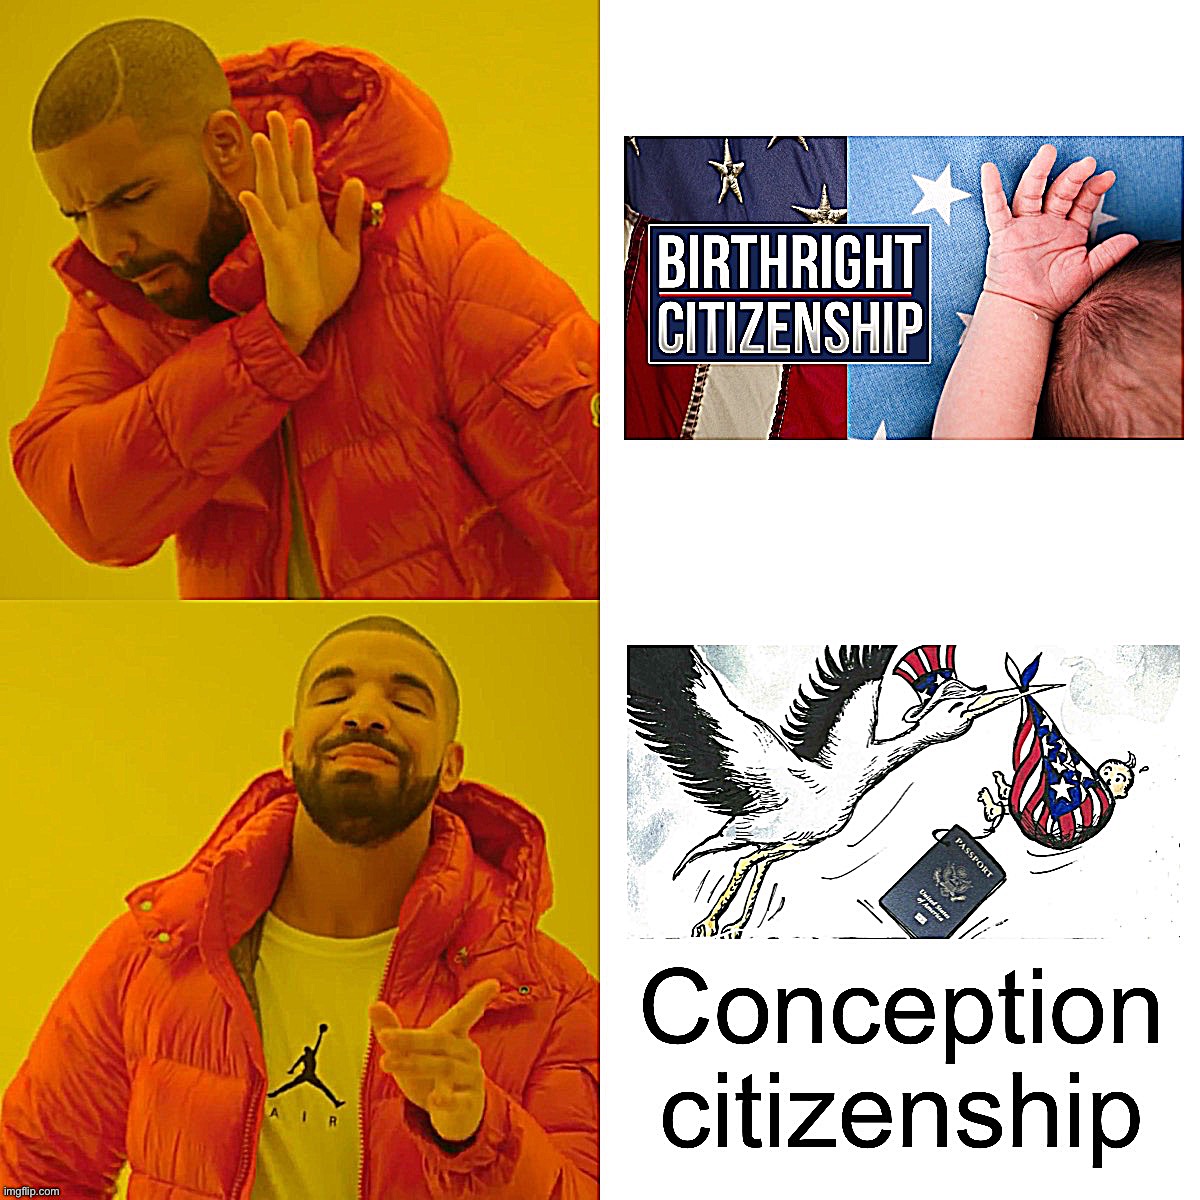 Conception citizenship | image tagged in conception citizenship | made w/ Imgflip meme maker